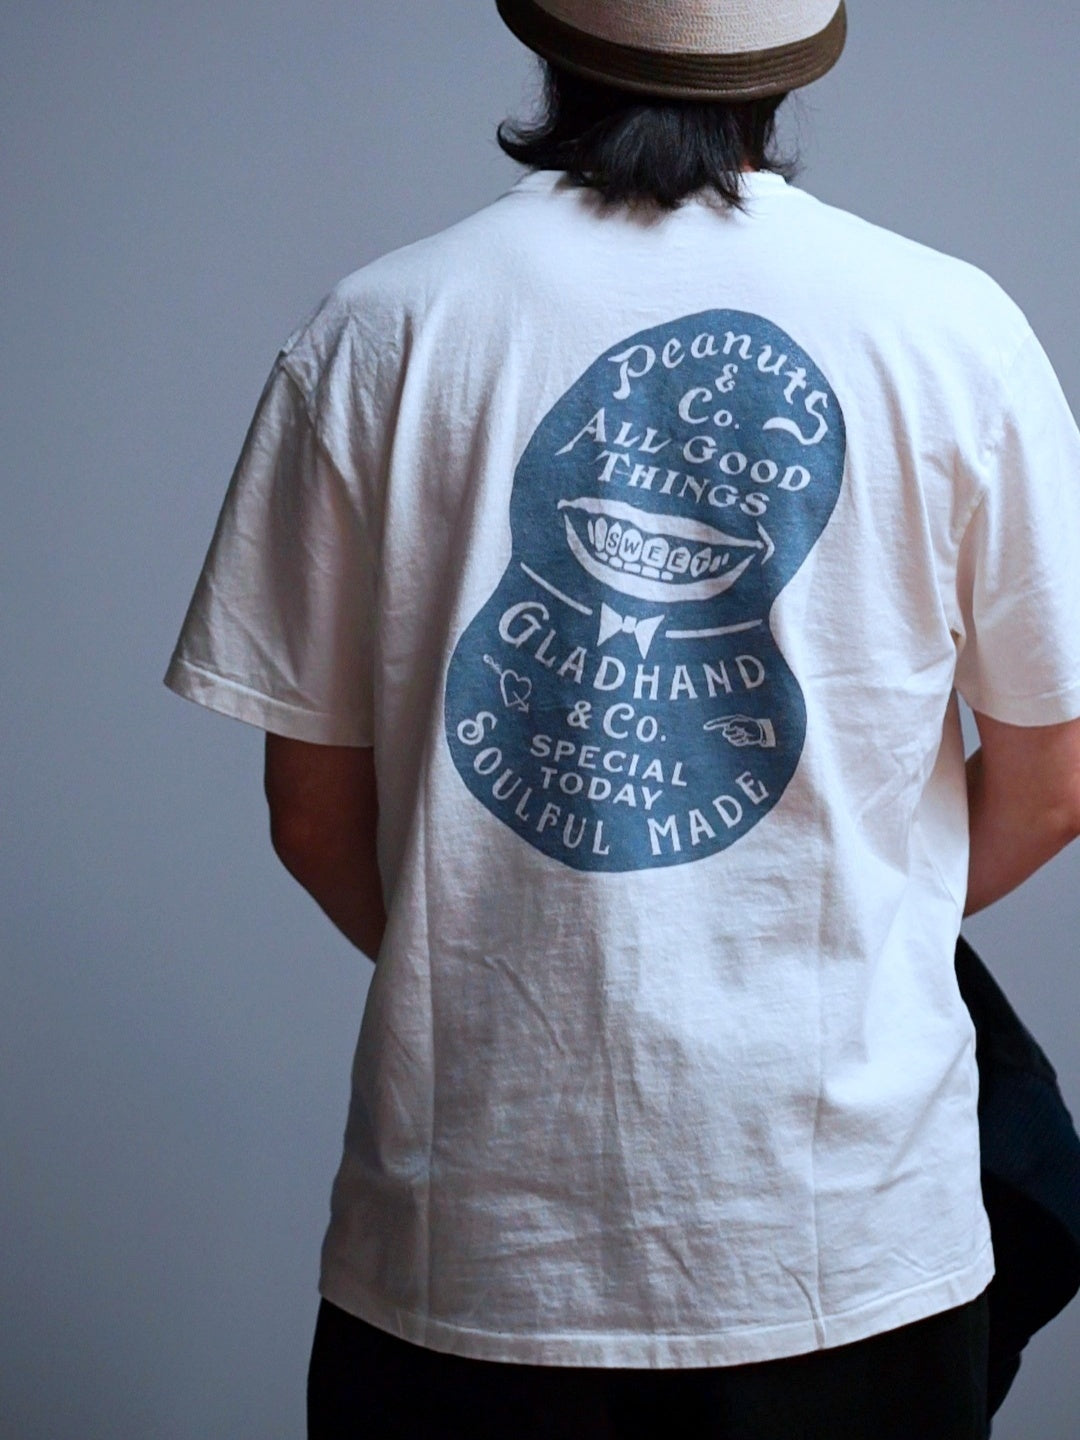 GLADHAND & Co. | Mr. SMILEY - S/S T-SHIRTS - White